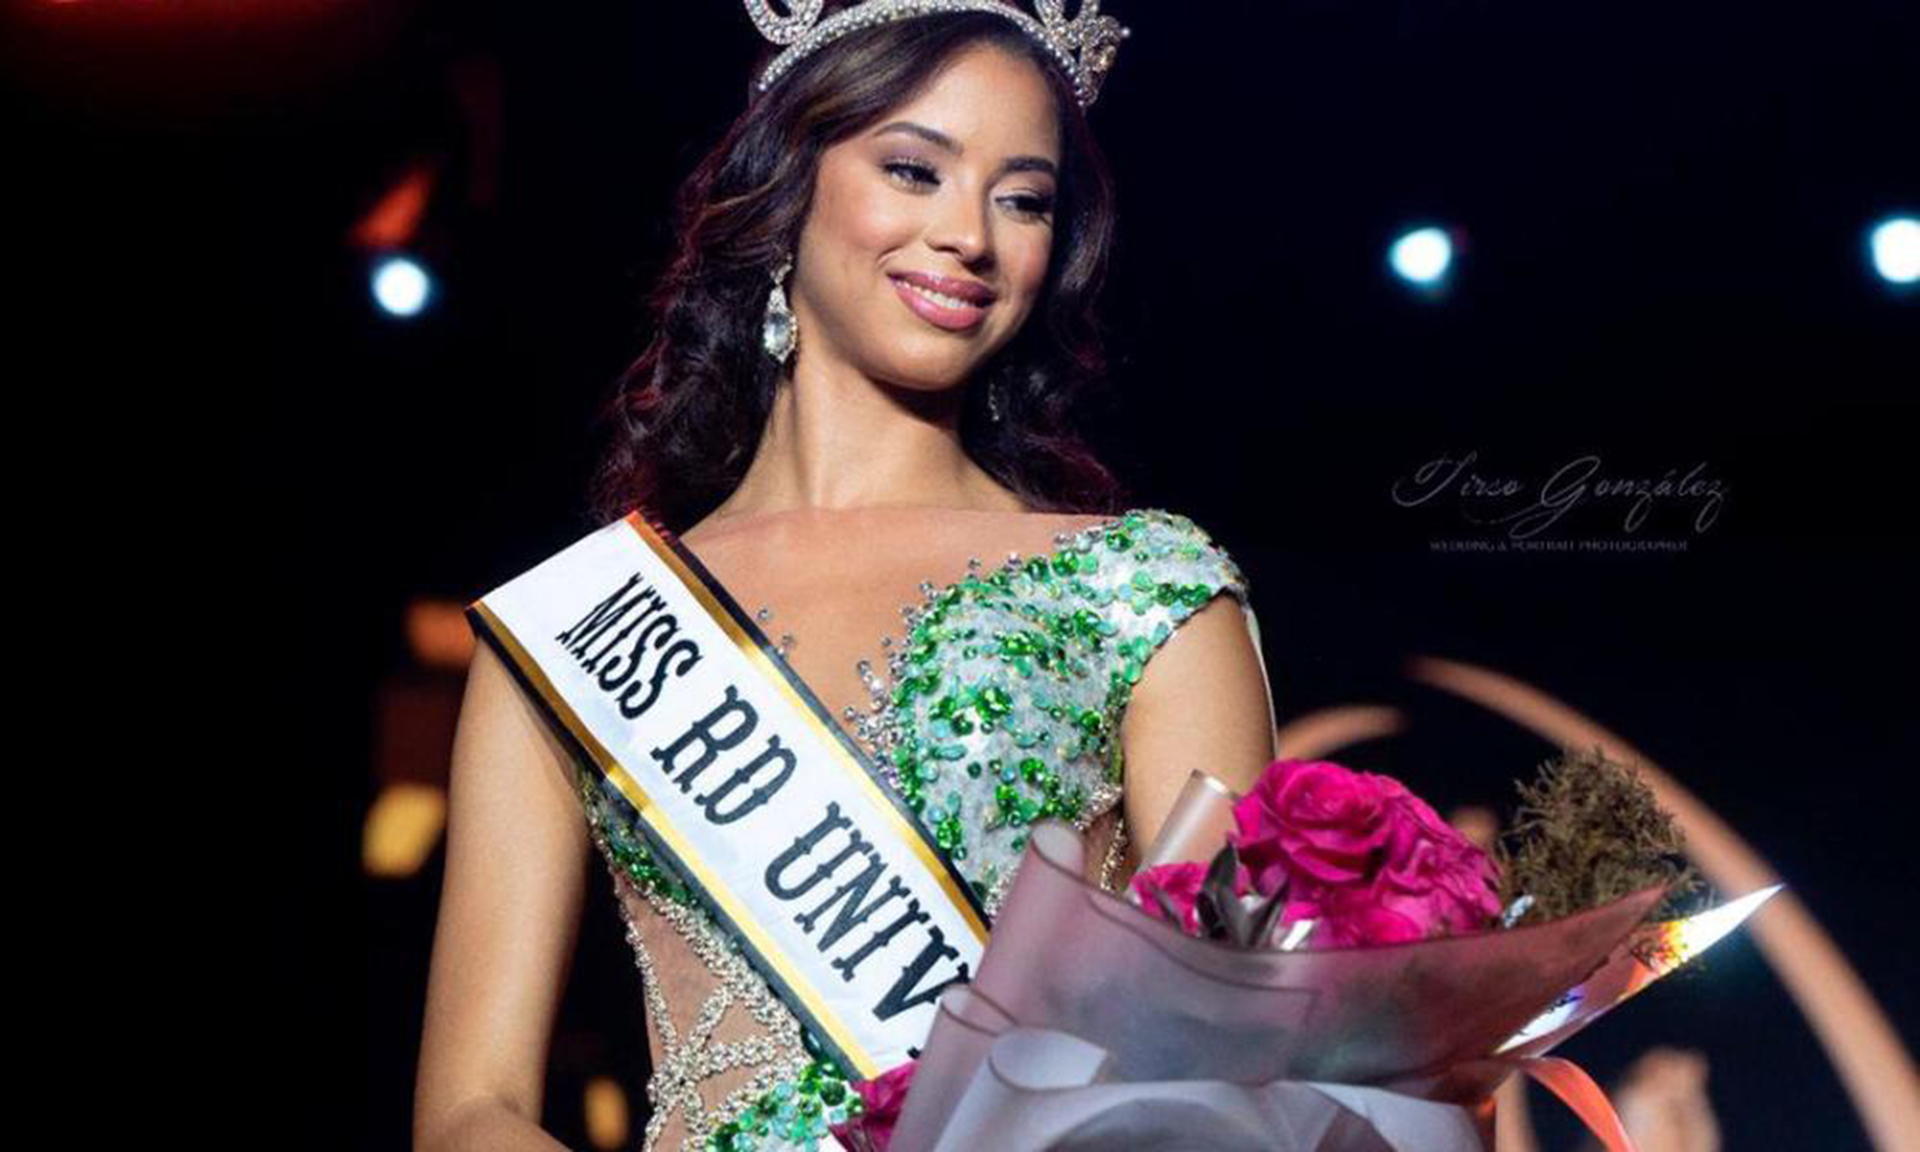 Andreina Martinez is crowned Miss Dominican Republic Universe 2021